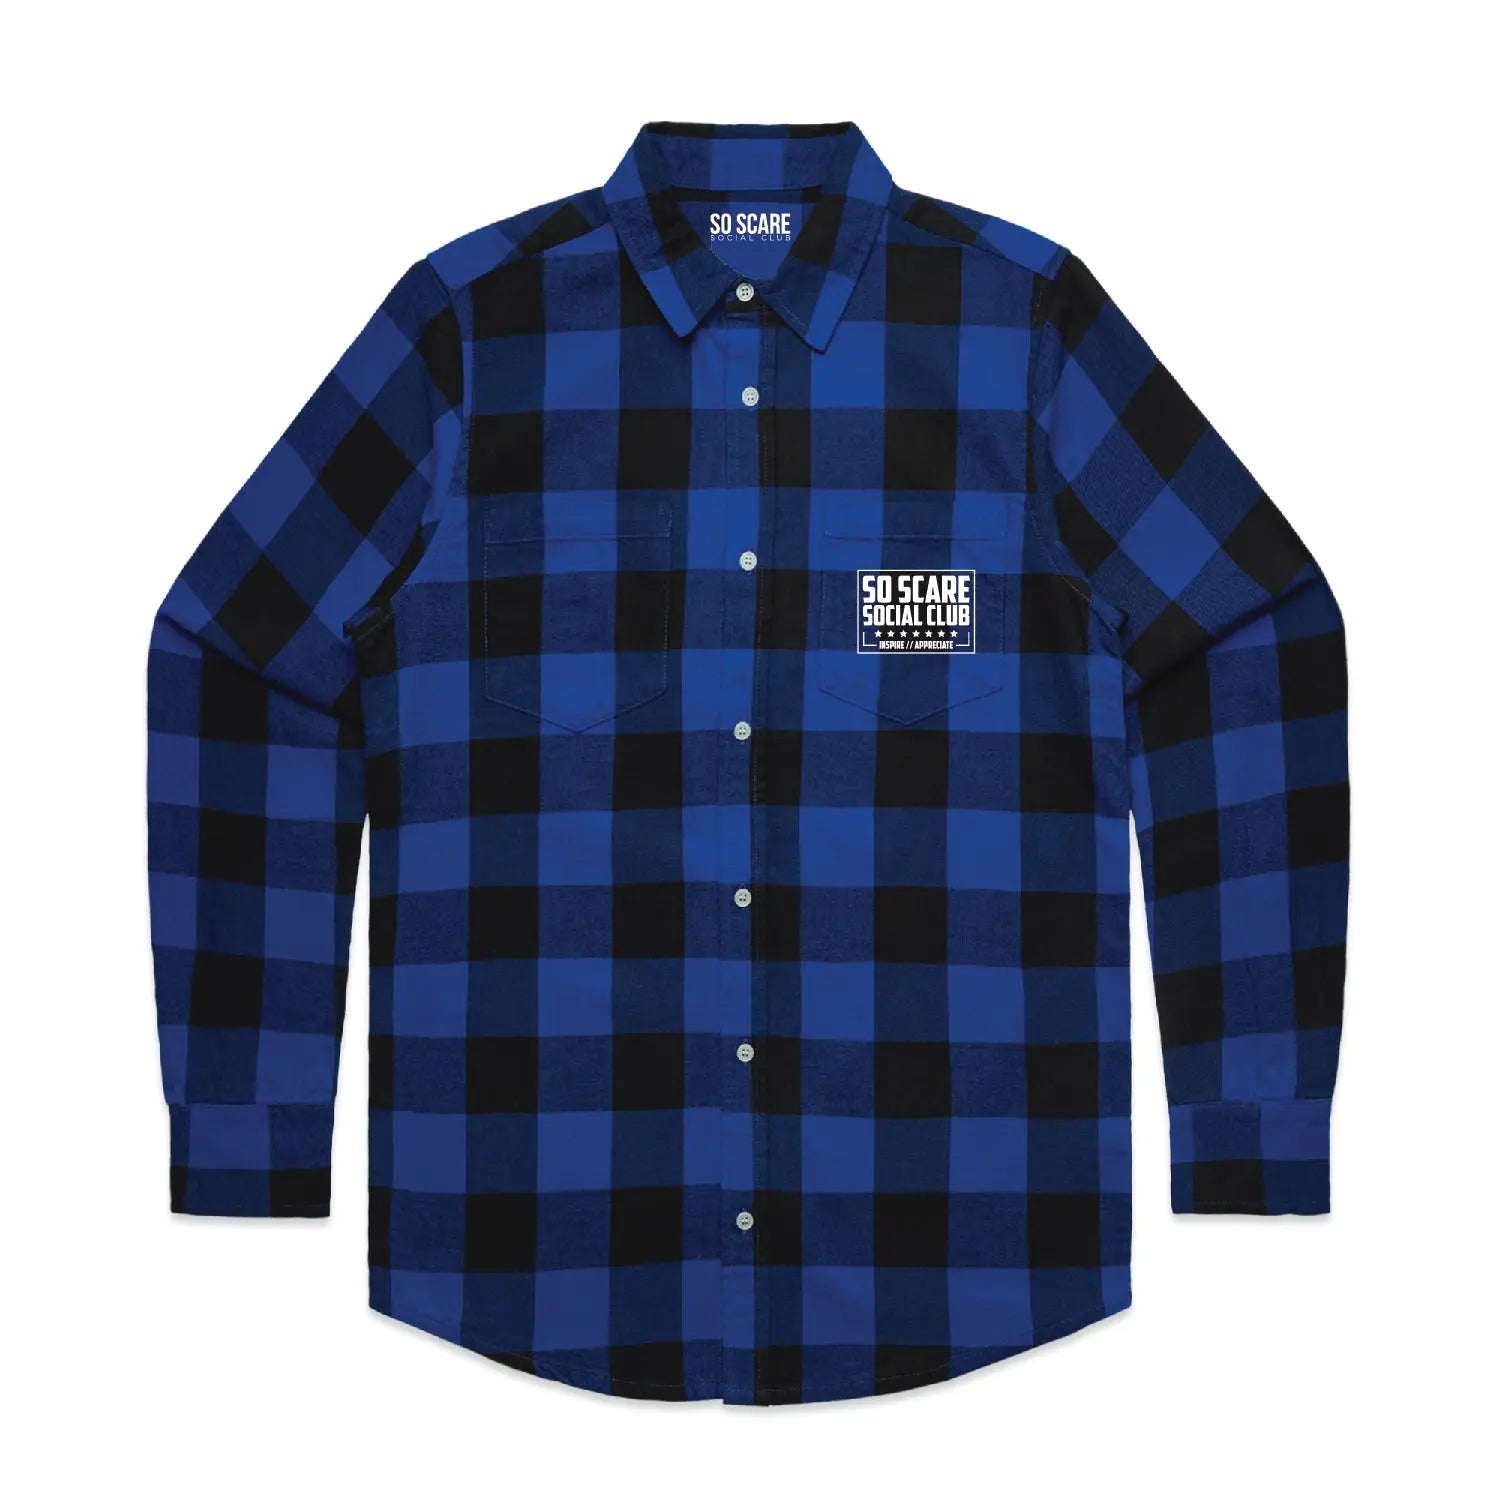 MMXVI CREST FLANNEL SO SCARE SOCIAL CLUB